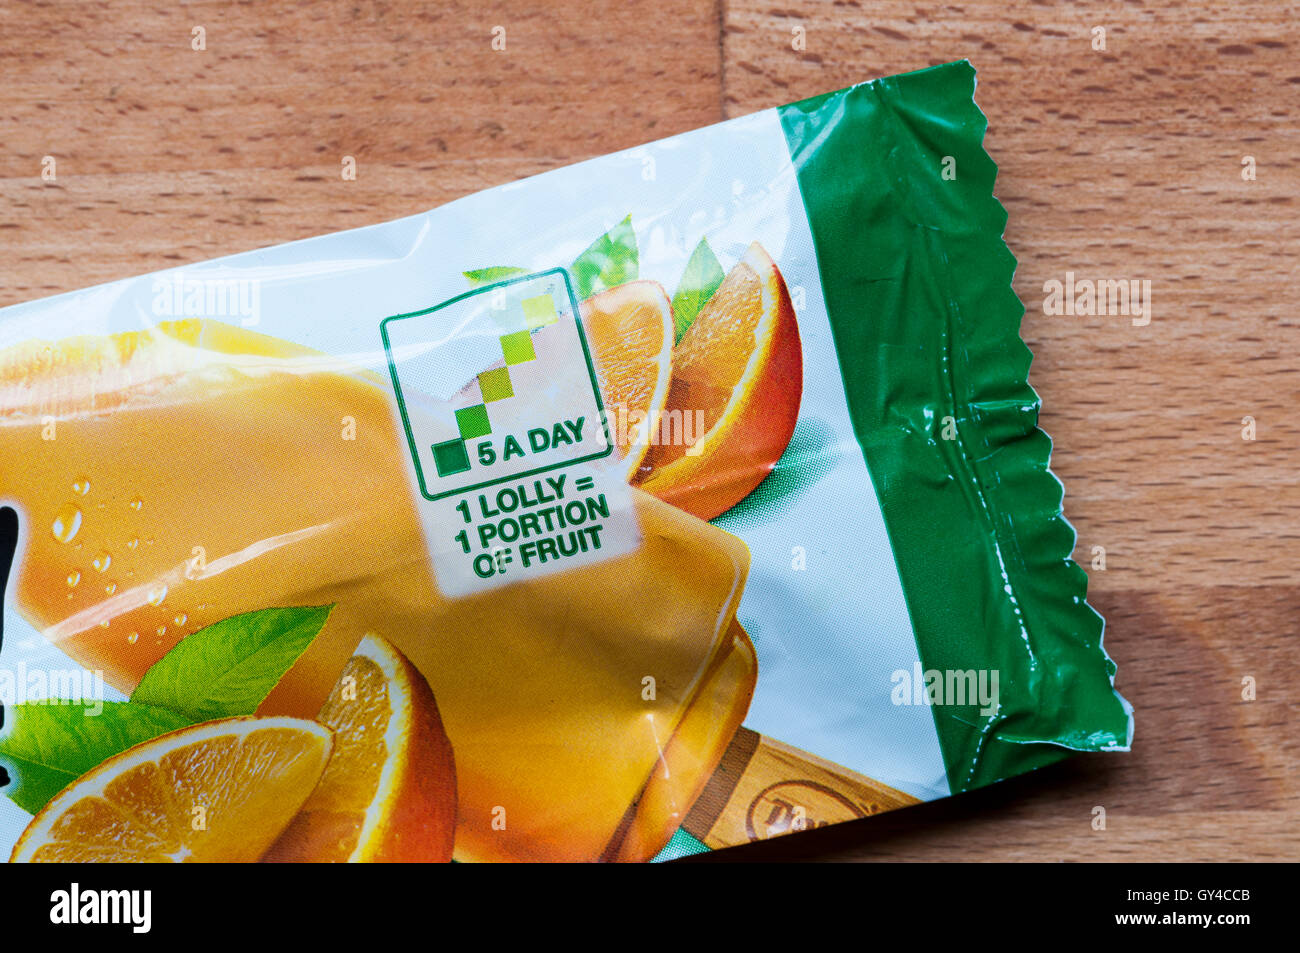 Wrapper of a Del Monte orange lolly says that 1 lolly equals 1 portion of fruit and is one of your 5 a day. Stock Photo